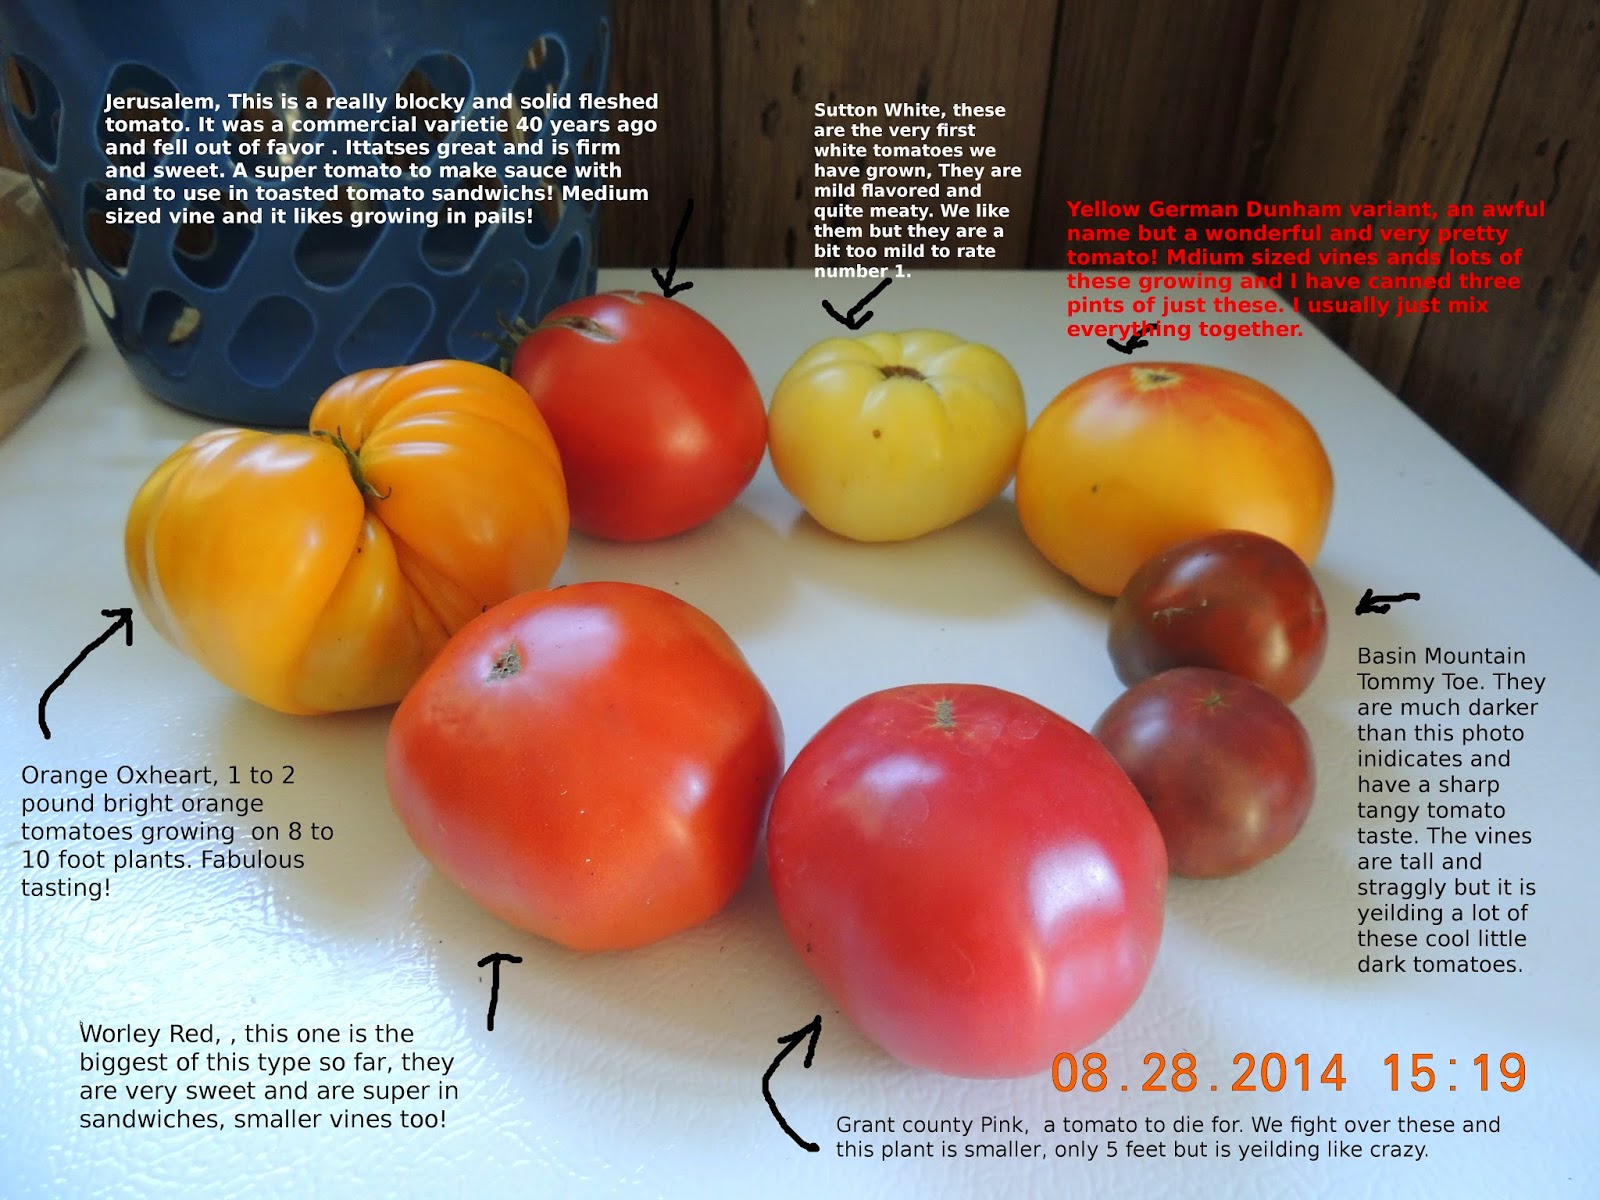 Rosedale Tomatoes: An Heirloom Variety with PL and RL Types